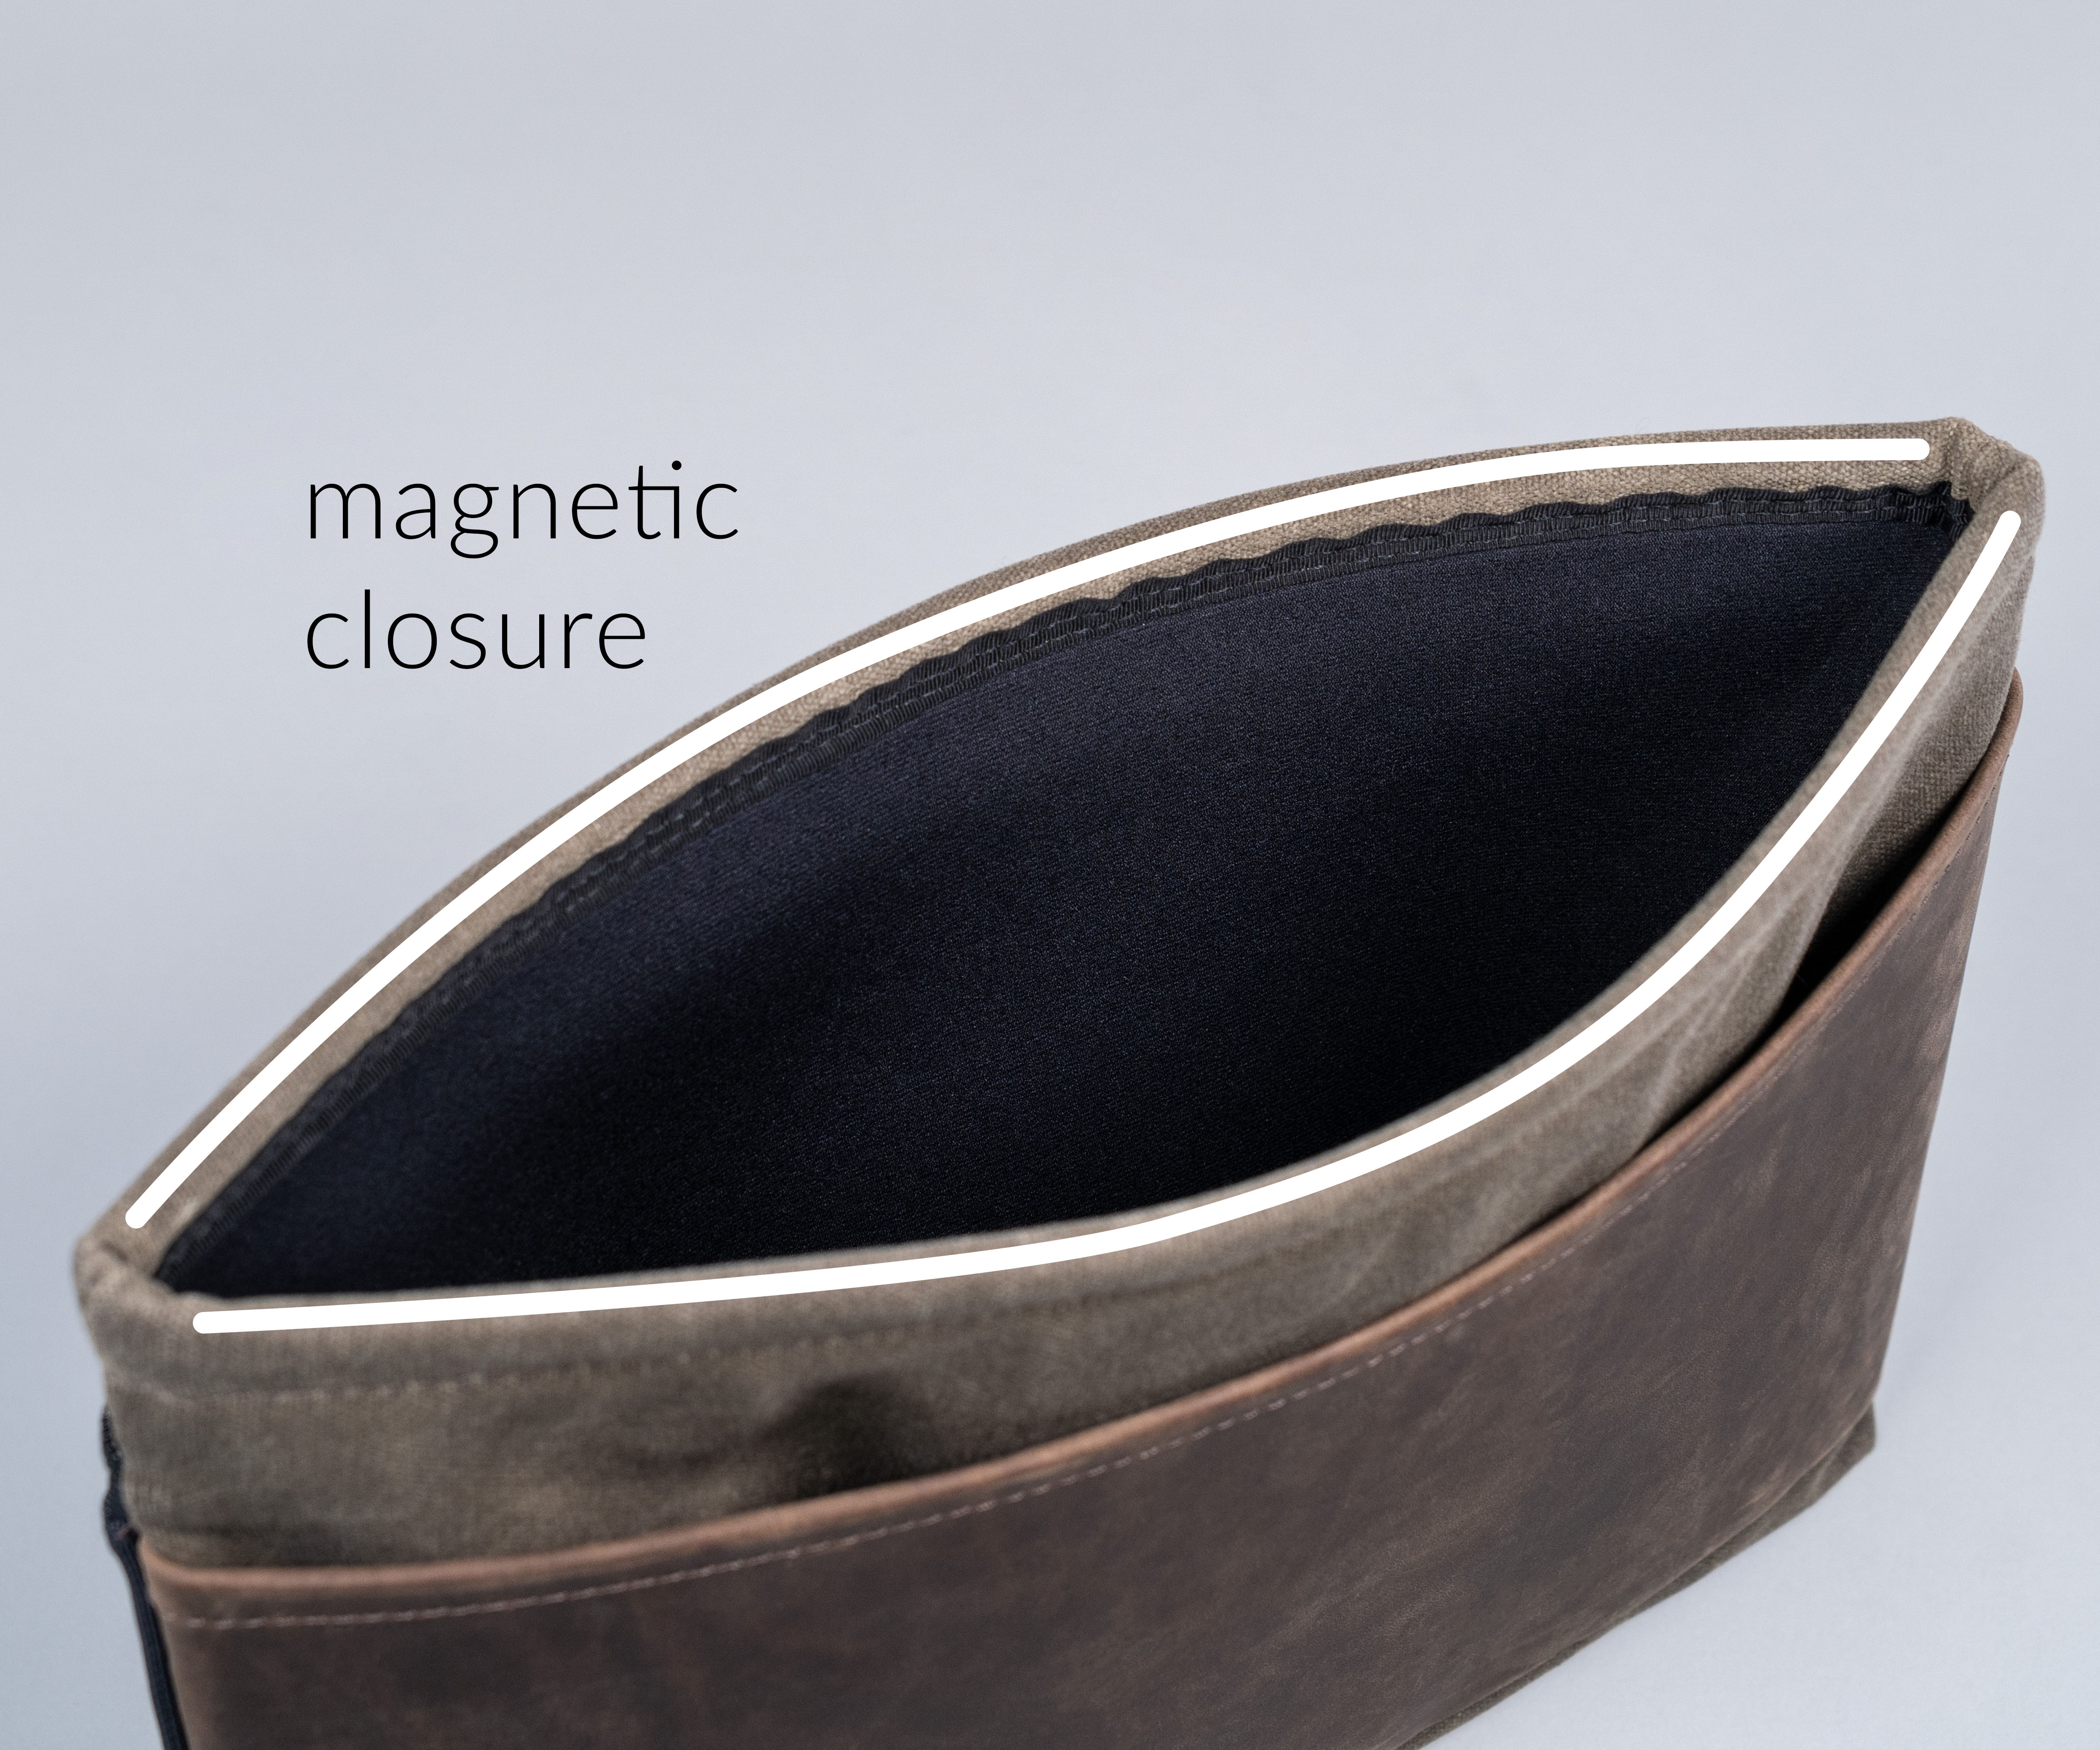 Quiet and secure rare-earth magnetic closure